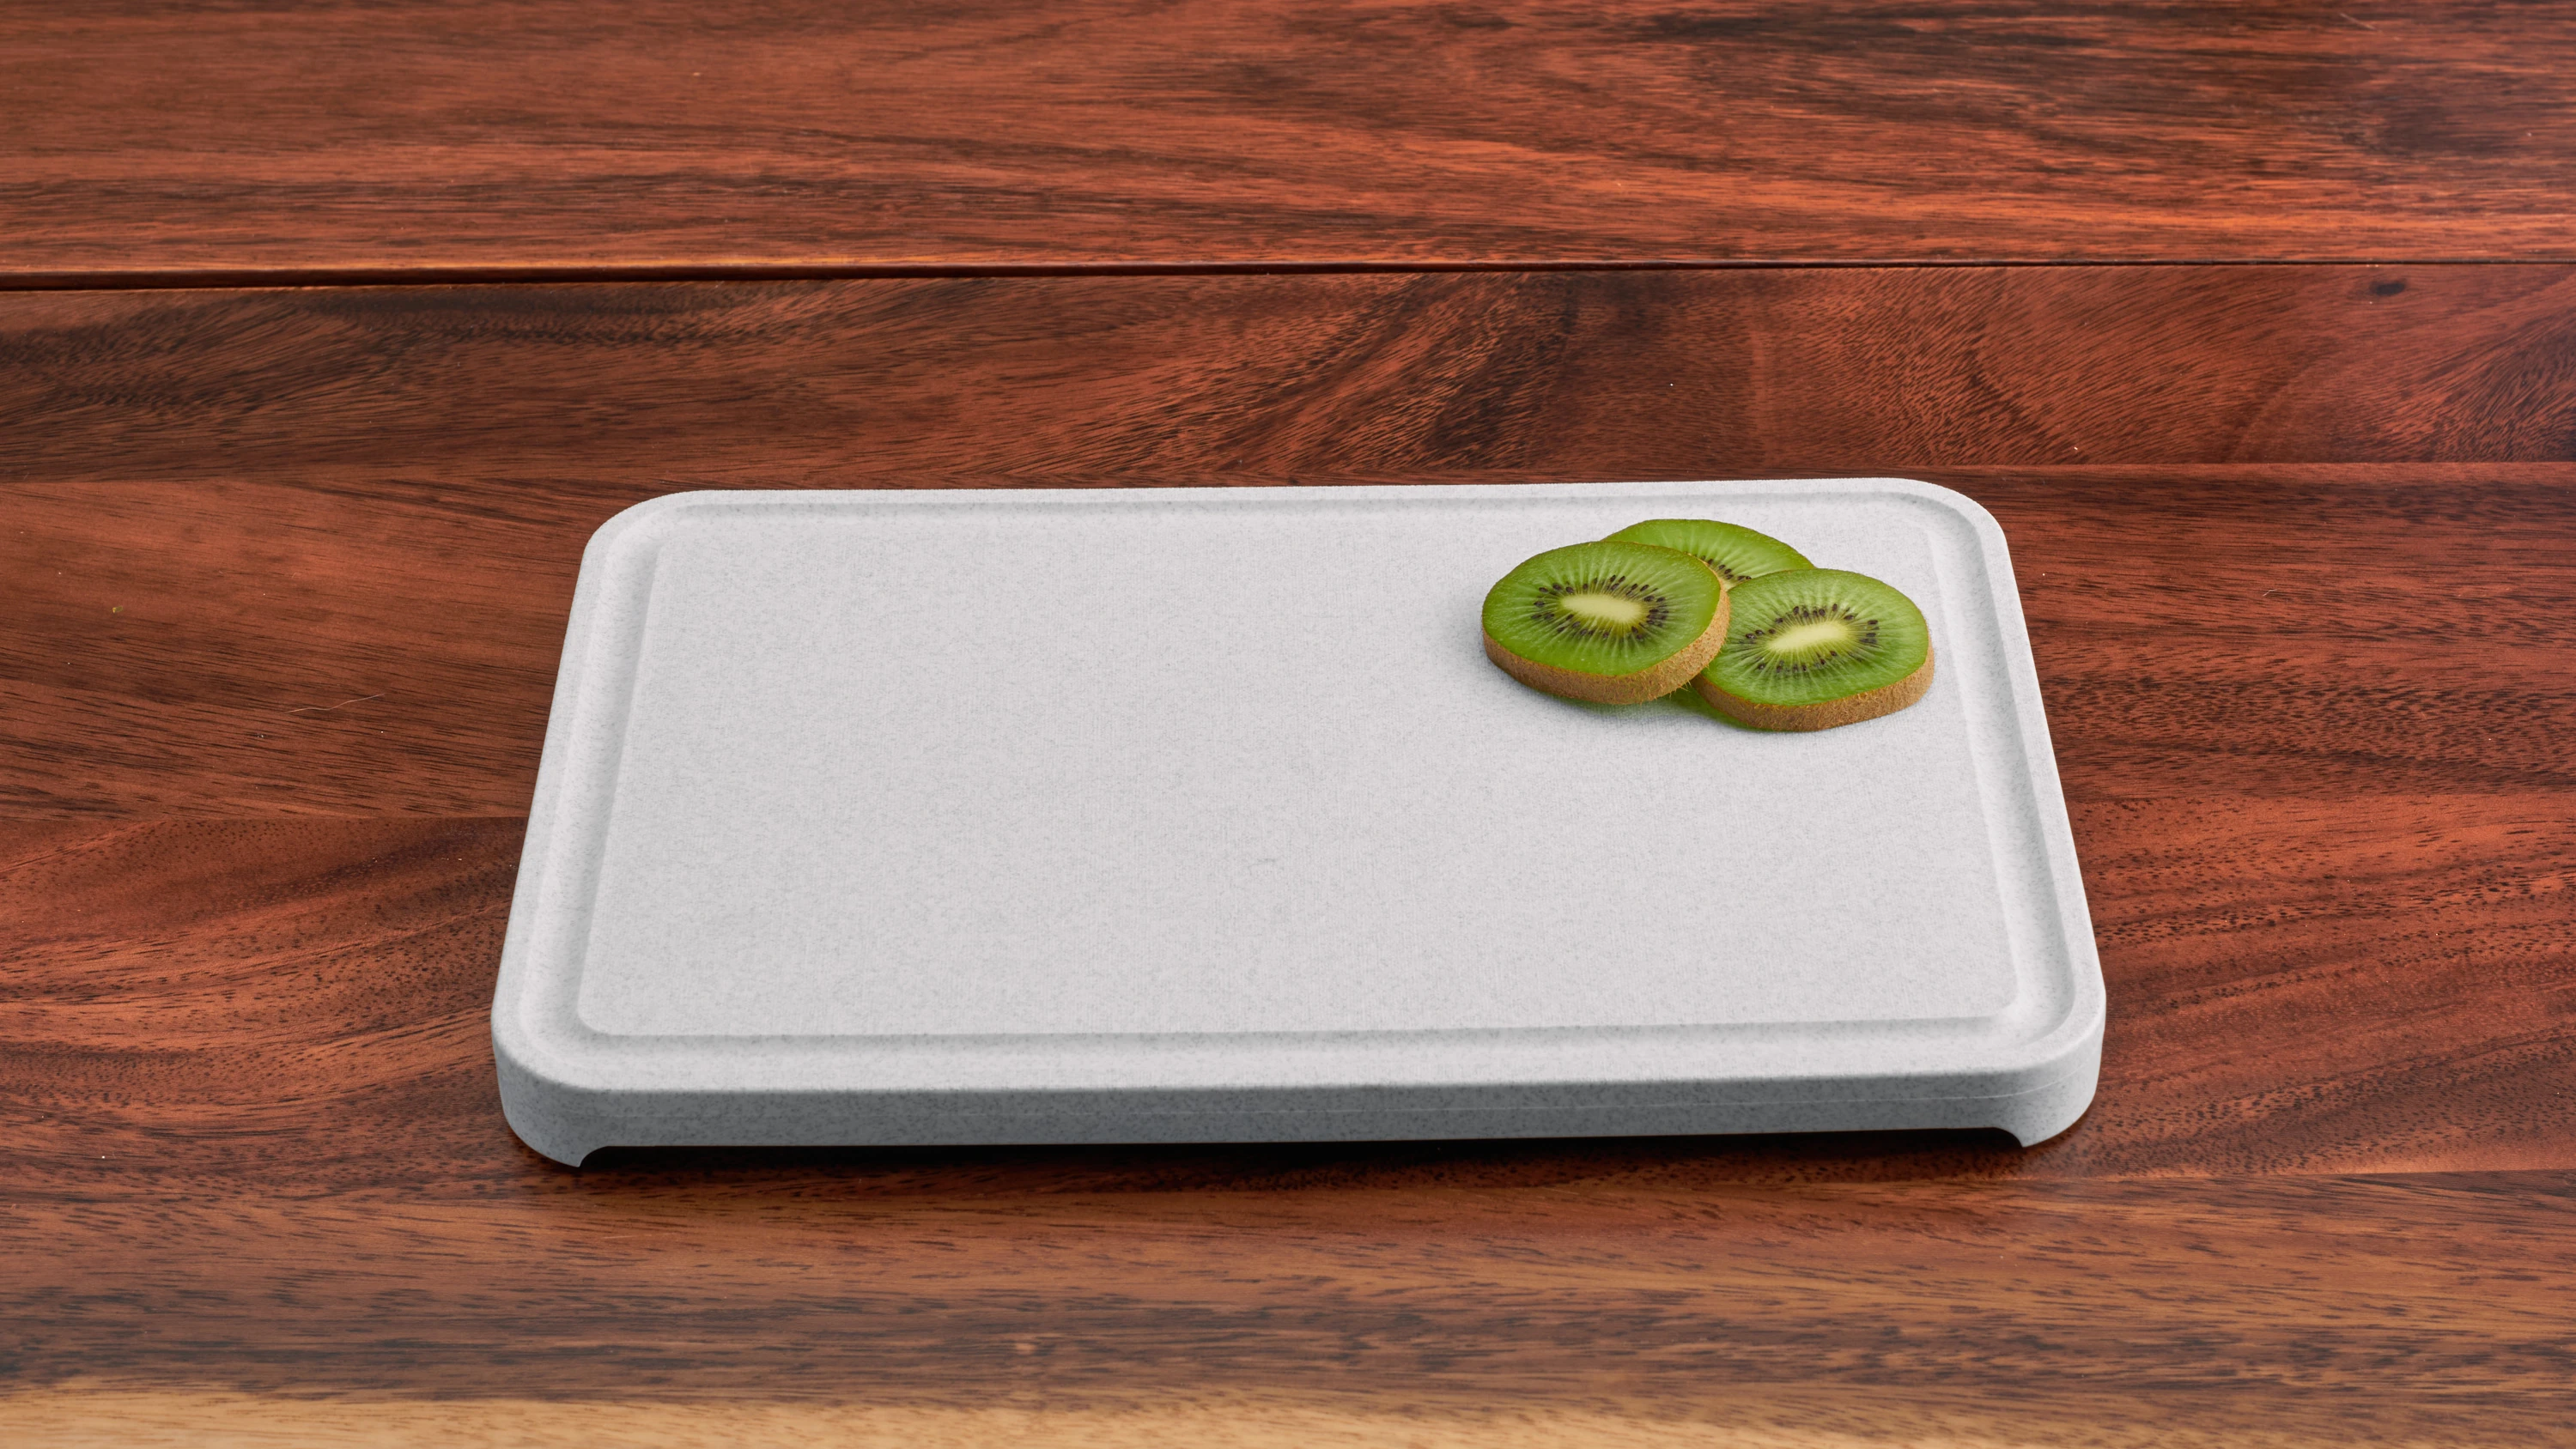 Make Prep Work Easy with This Cutting Board with Mats